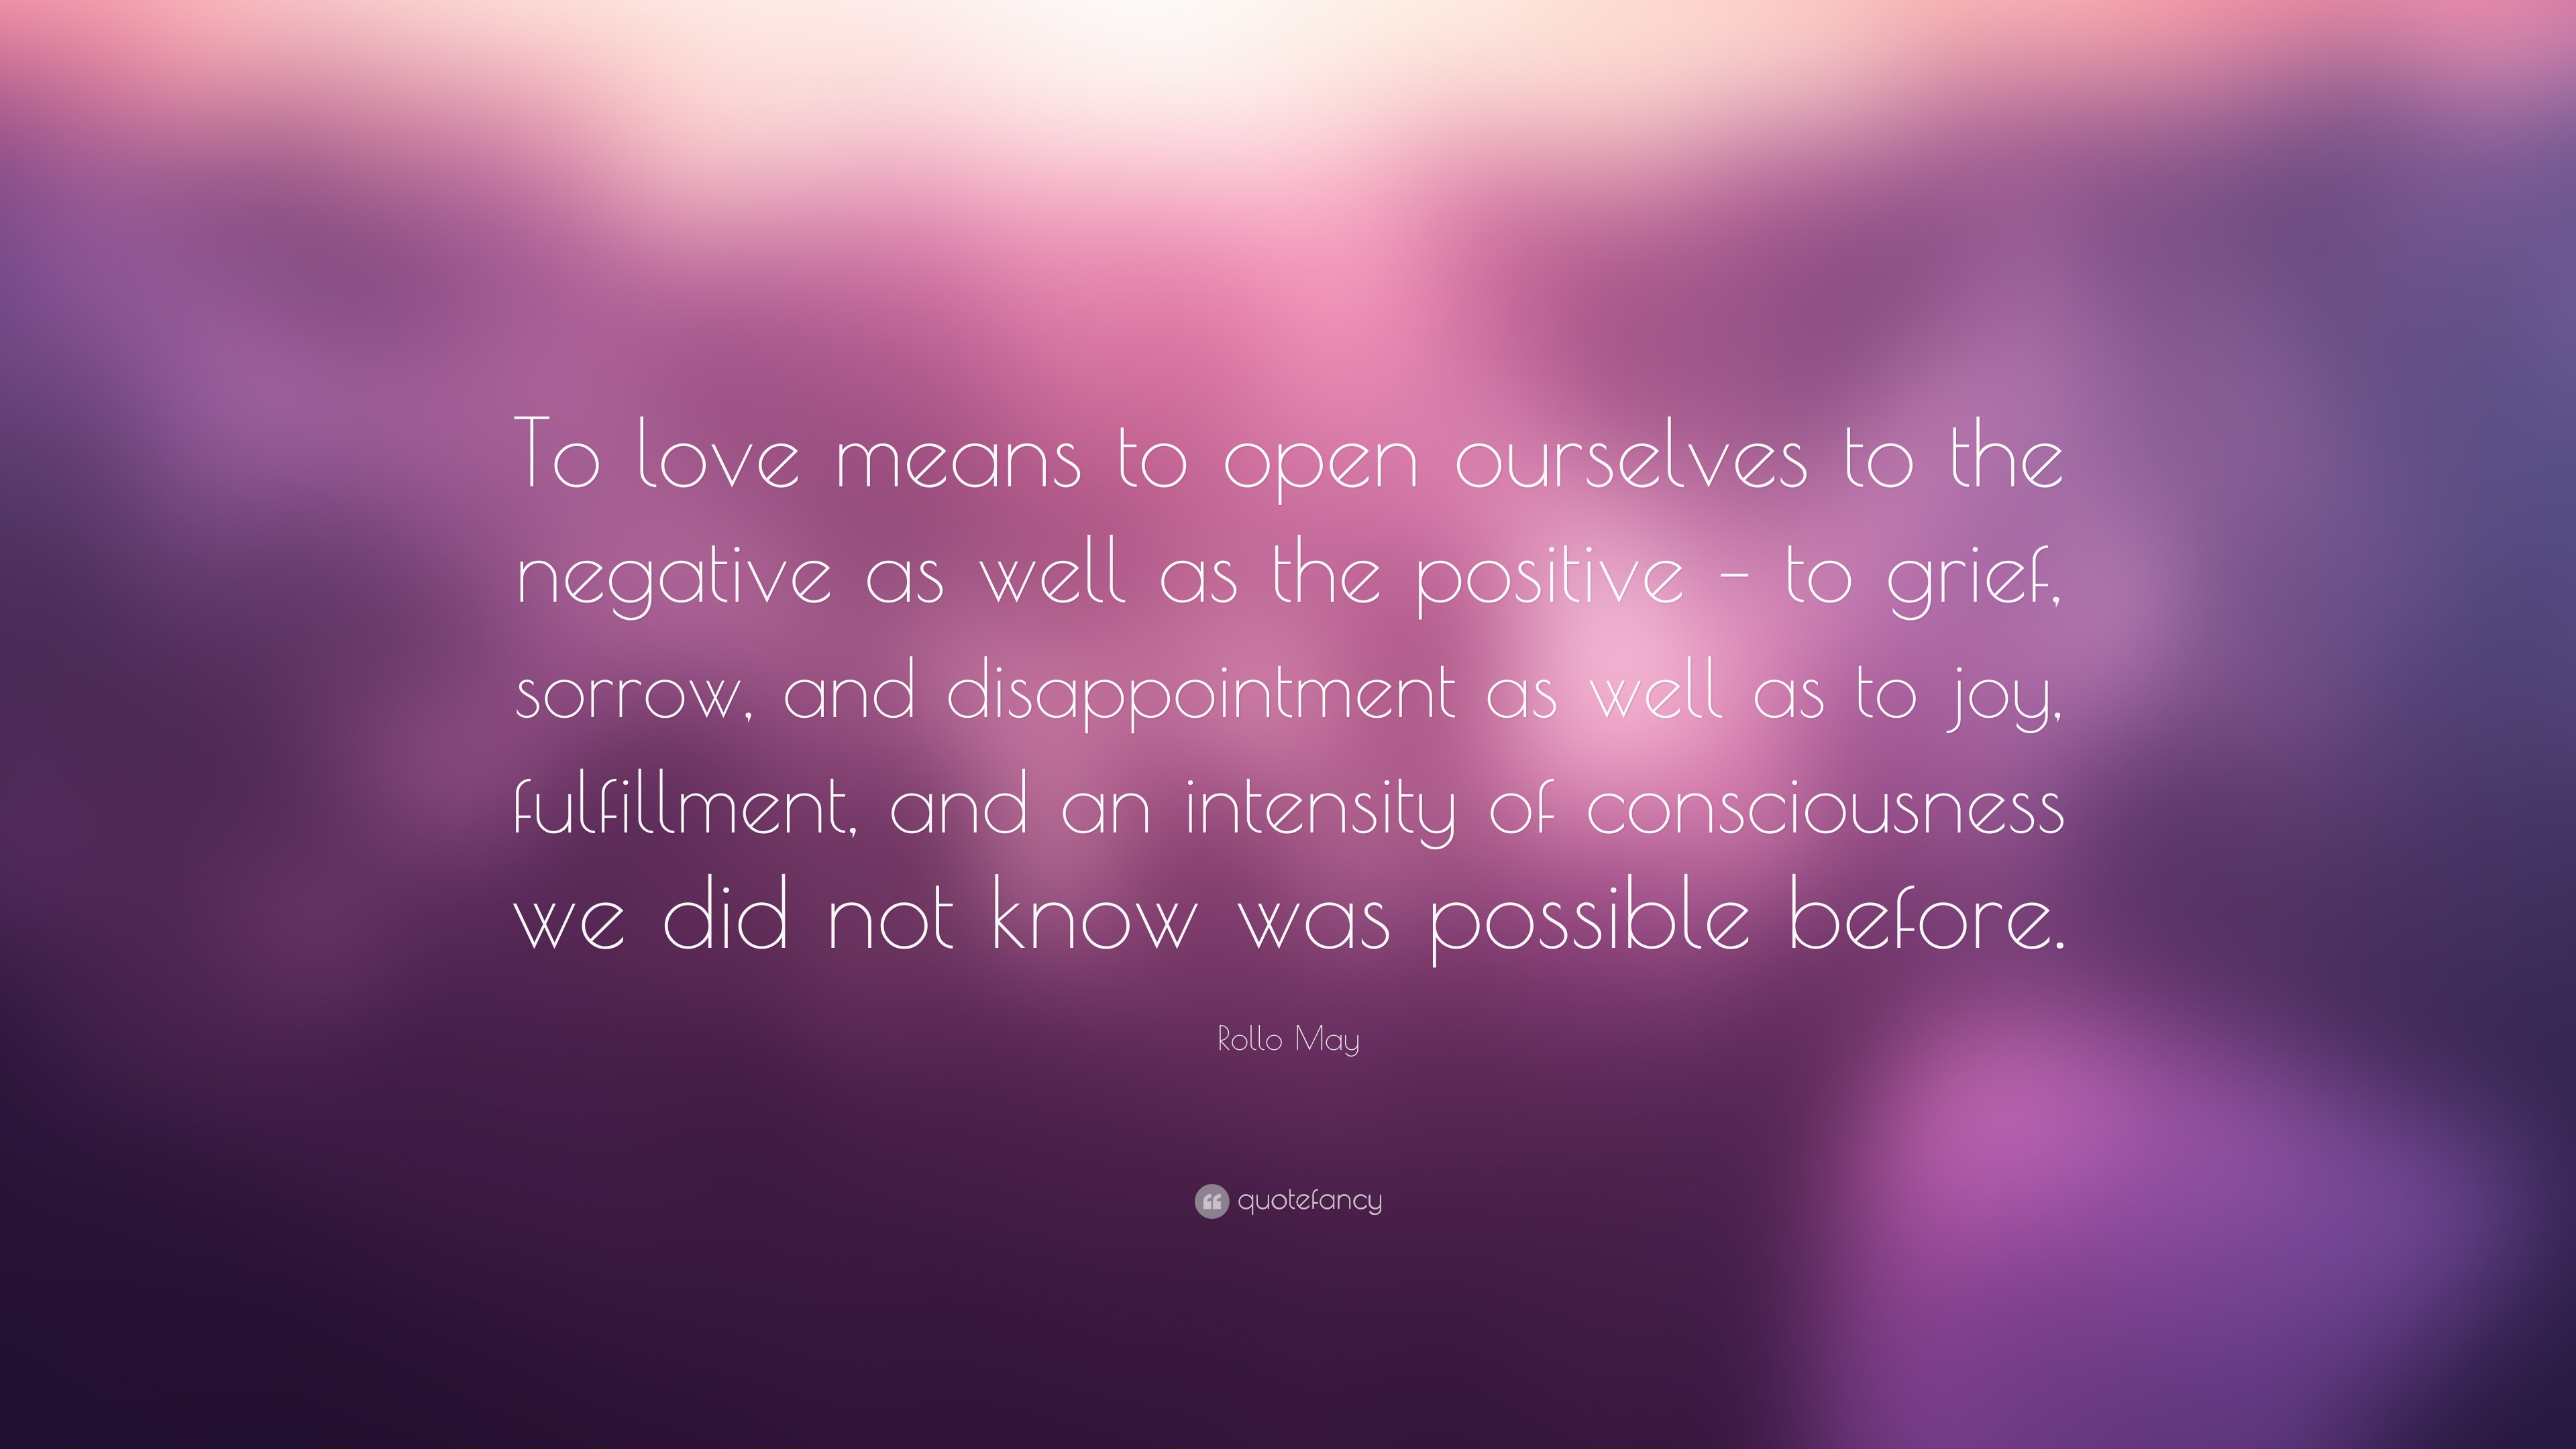 Rollo May Quote: “To love means to open ourselves to the negative as ...